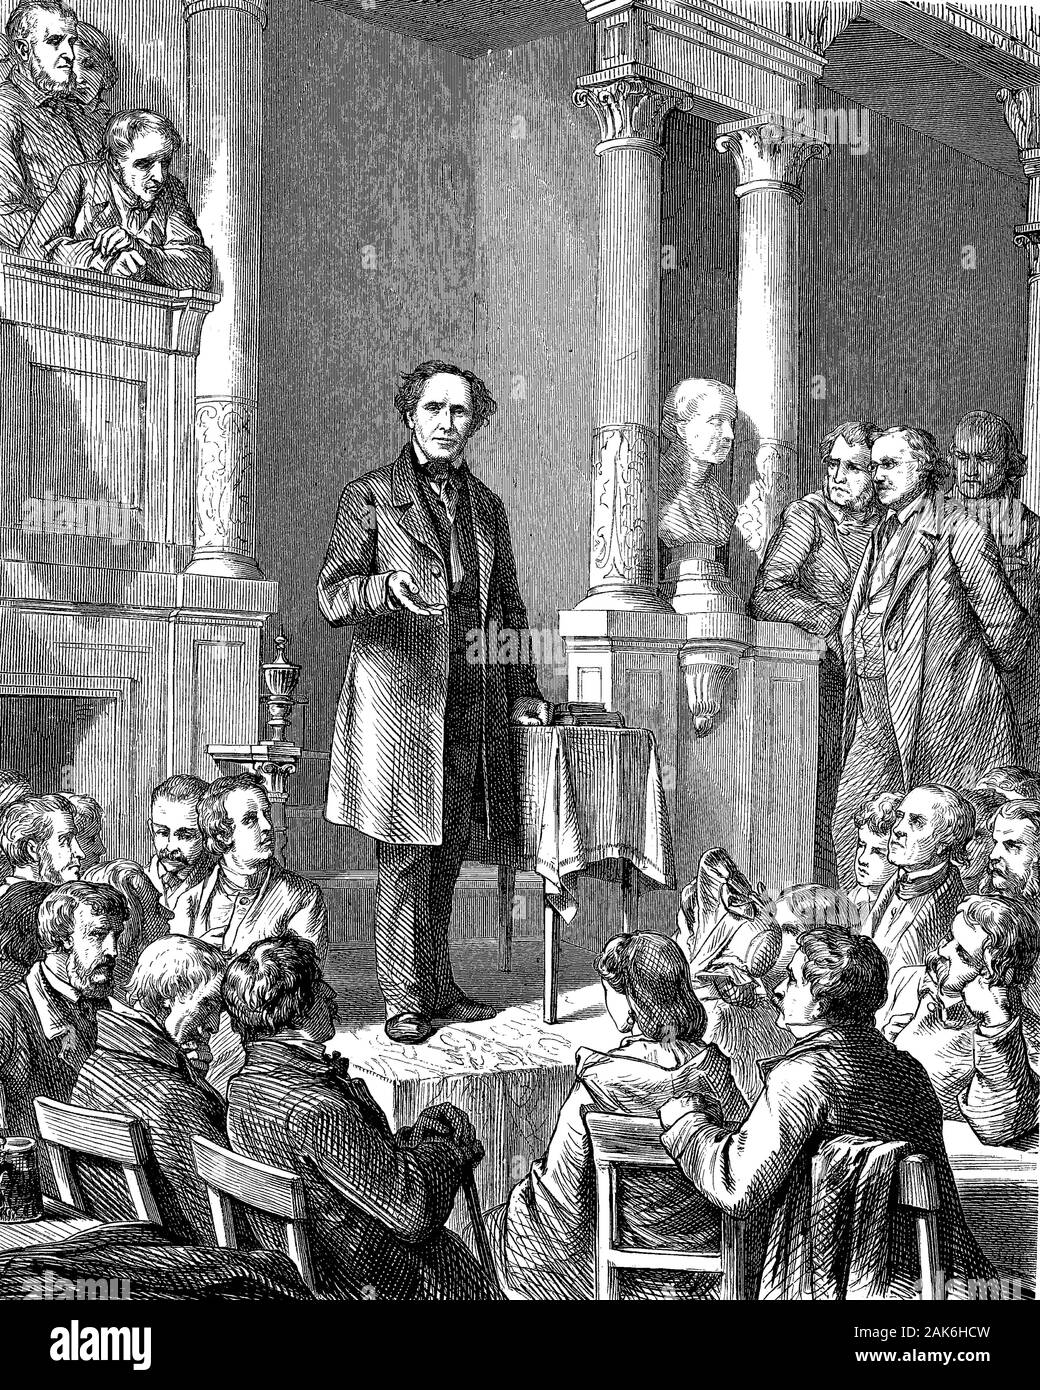 Ludwig Würkert before his congregation. Friedrich Ludwig Würkert, 1800 - 1876, was a Protestant pastor, writer and revolutionary, woodcut from 1864 Stock Photo